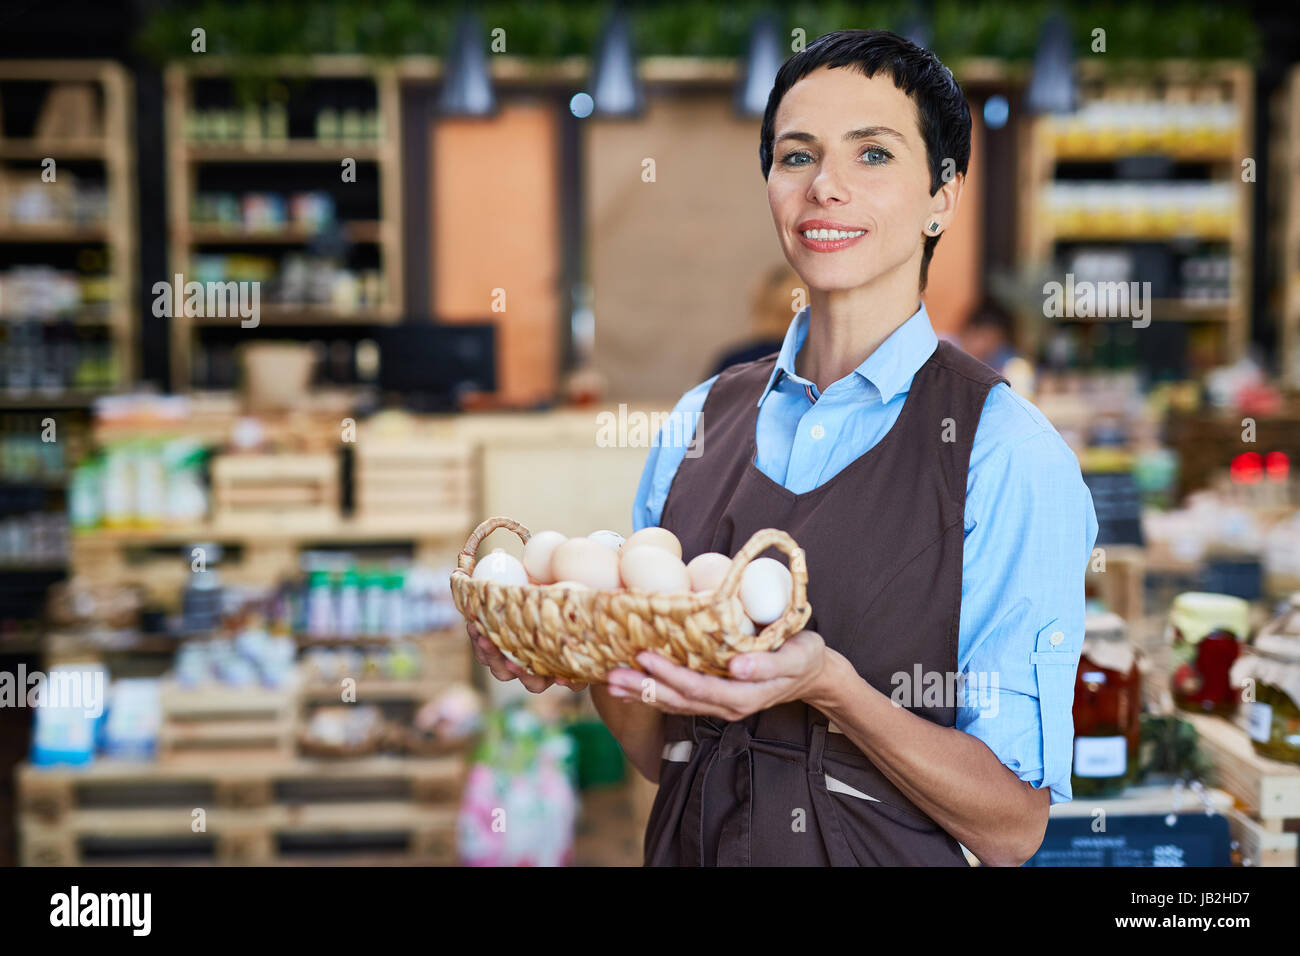 Shop Assistant with Wicker Basket Stock Photo